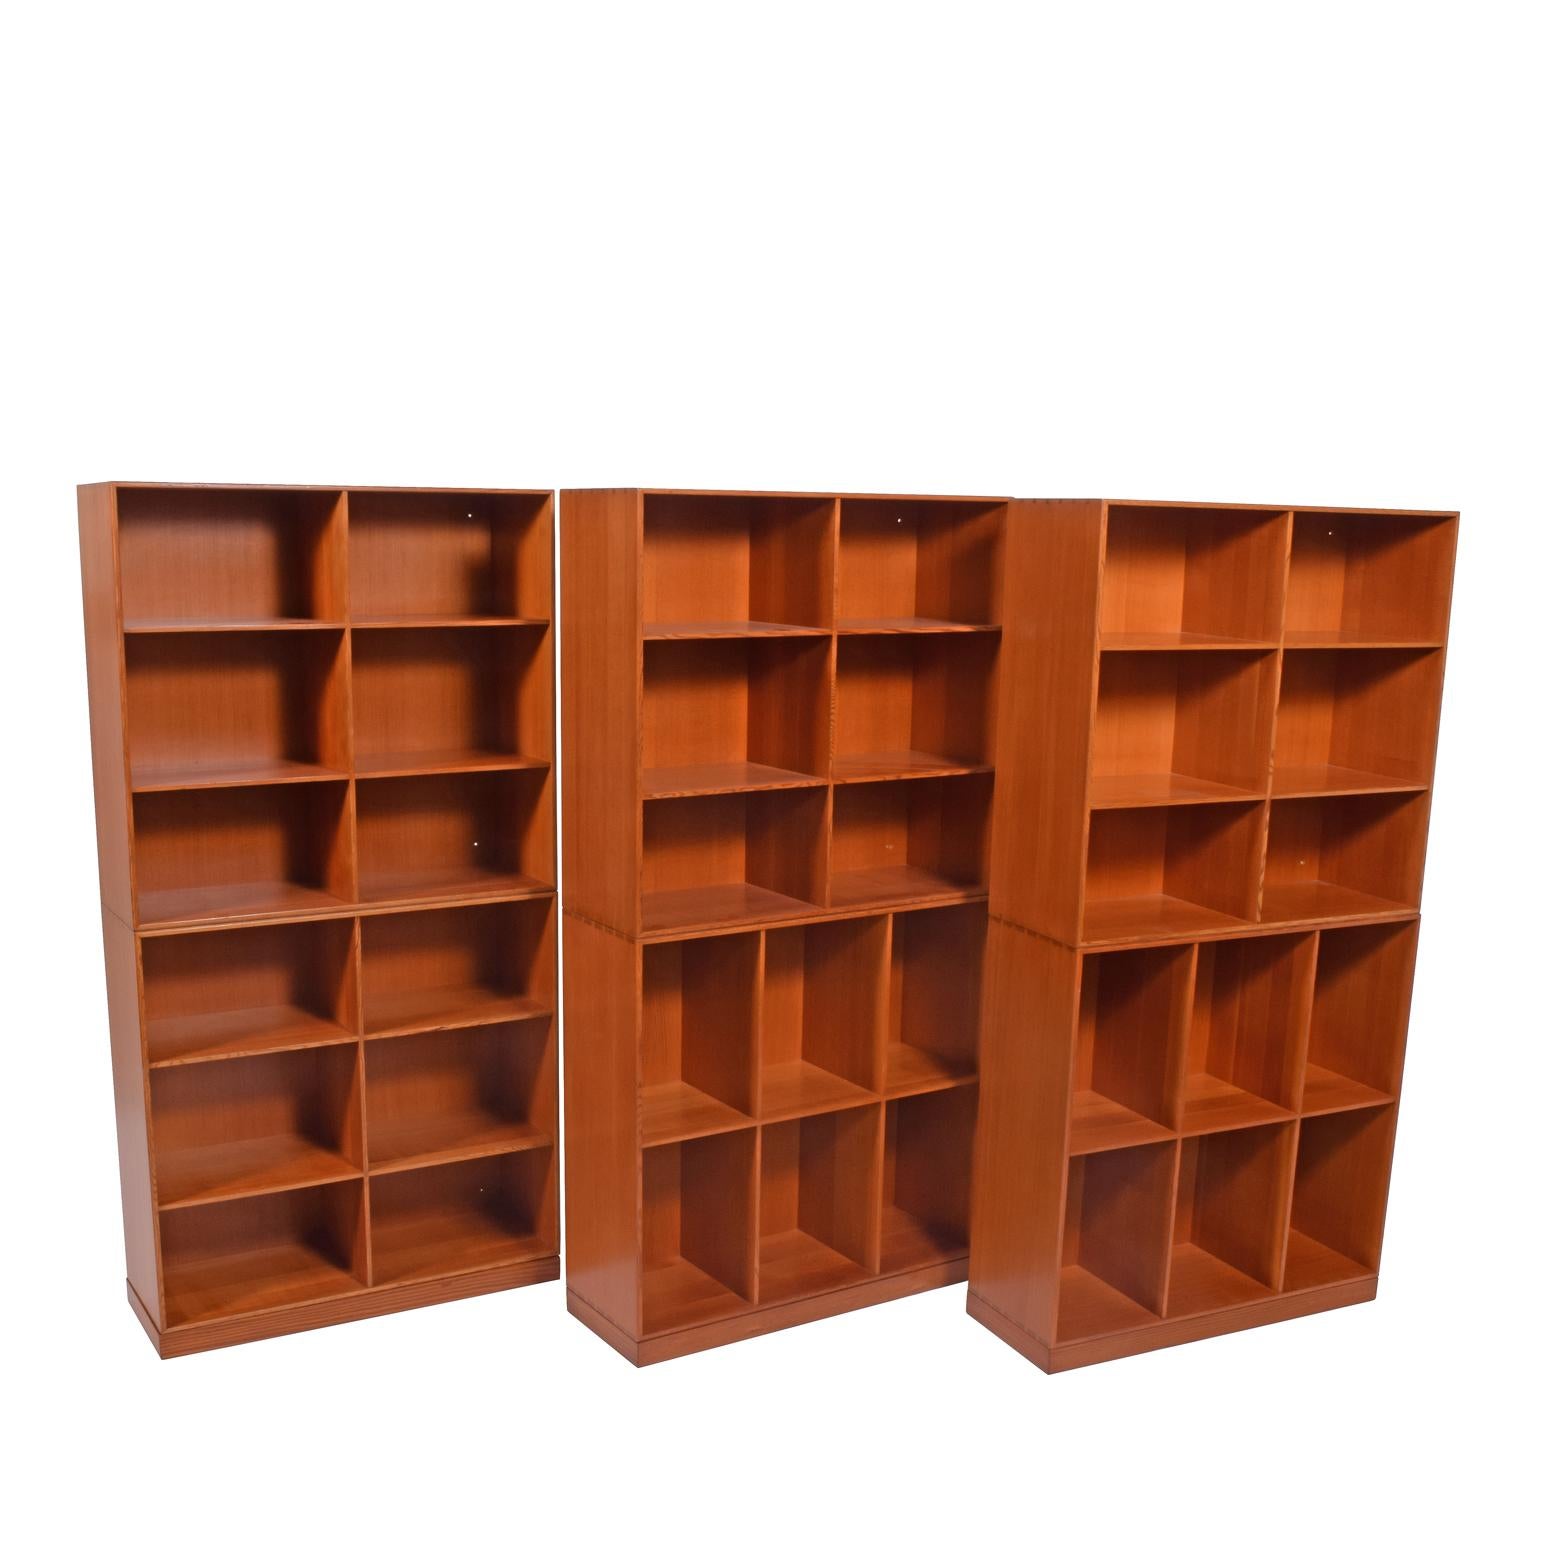 A Danish Classic. Solid Oregon pine, six open bookcases, all with manufacturing label on the back. Each bookcase is separate and can be rearranged as desired. Rud Rasmussen originally designed in the 1920s.

Measure: Each cabinet 29.75